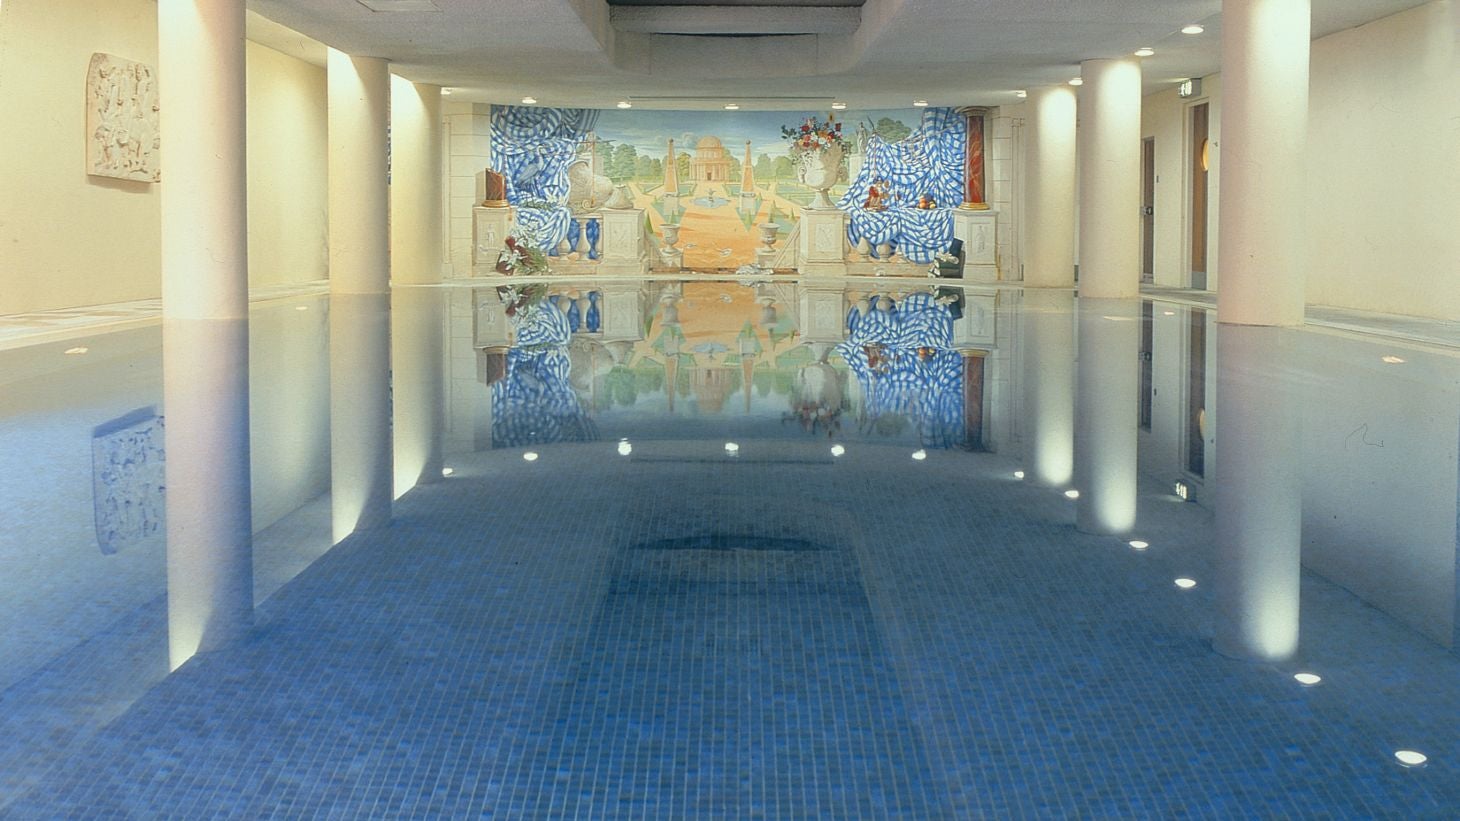 A peaceful swimming pool at The Spa at The Merrion, Dublin